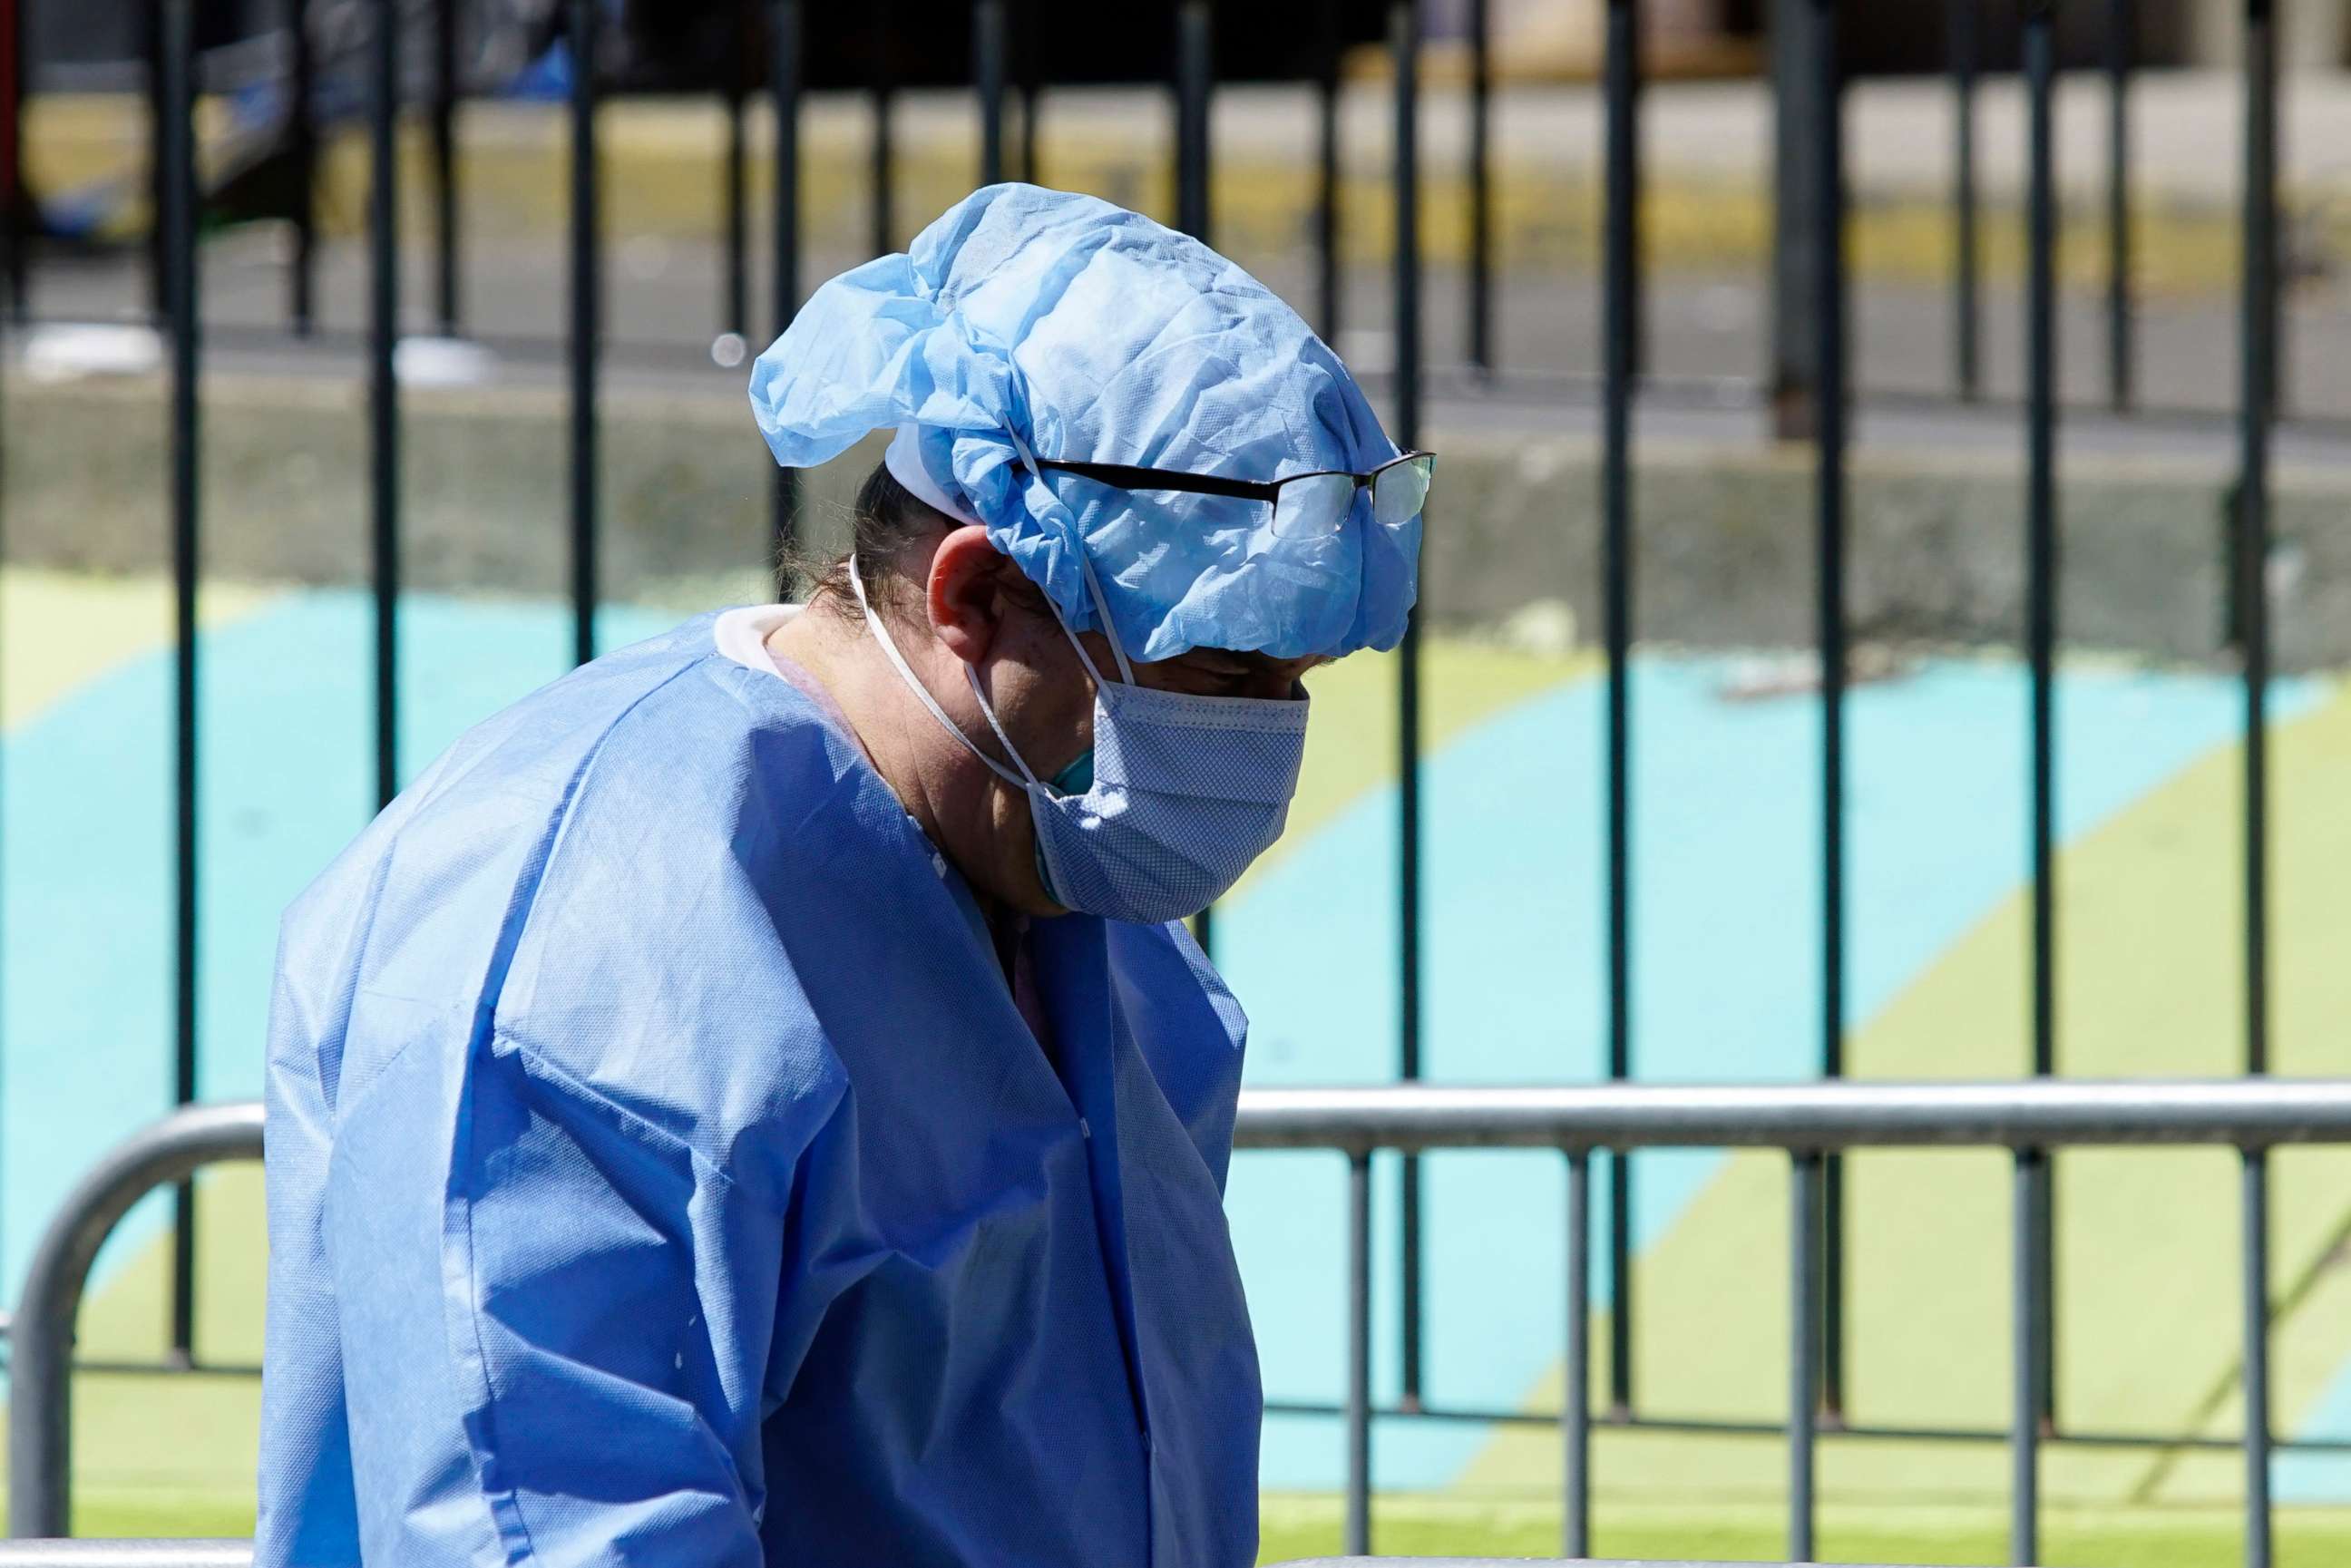 PHOTO: A healthcare worker in personal protective equipment (PPE) walks outside Elmhurst Hospital during the outbreak of the coronavirus disease (COVID-19) in the Queens, N.Y., April 6, 2020.